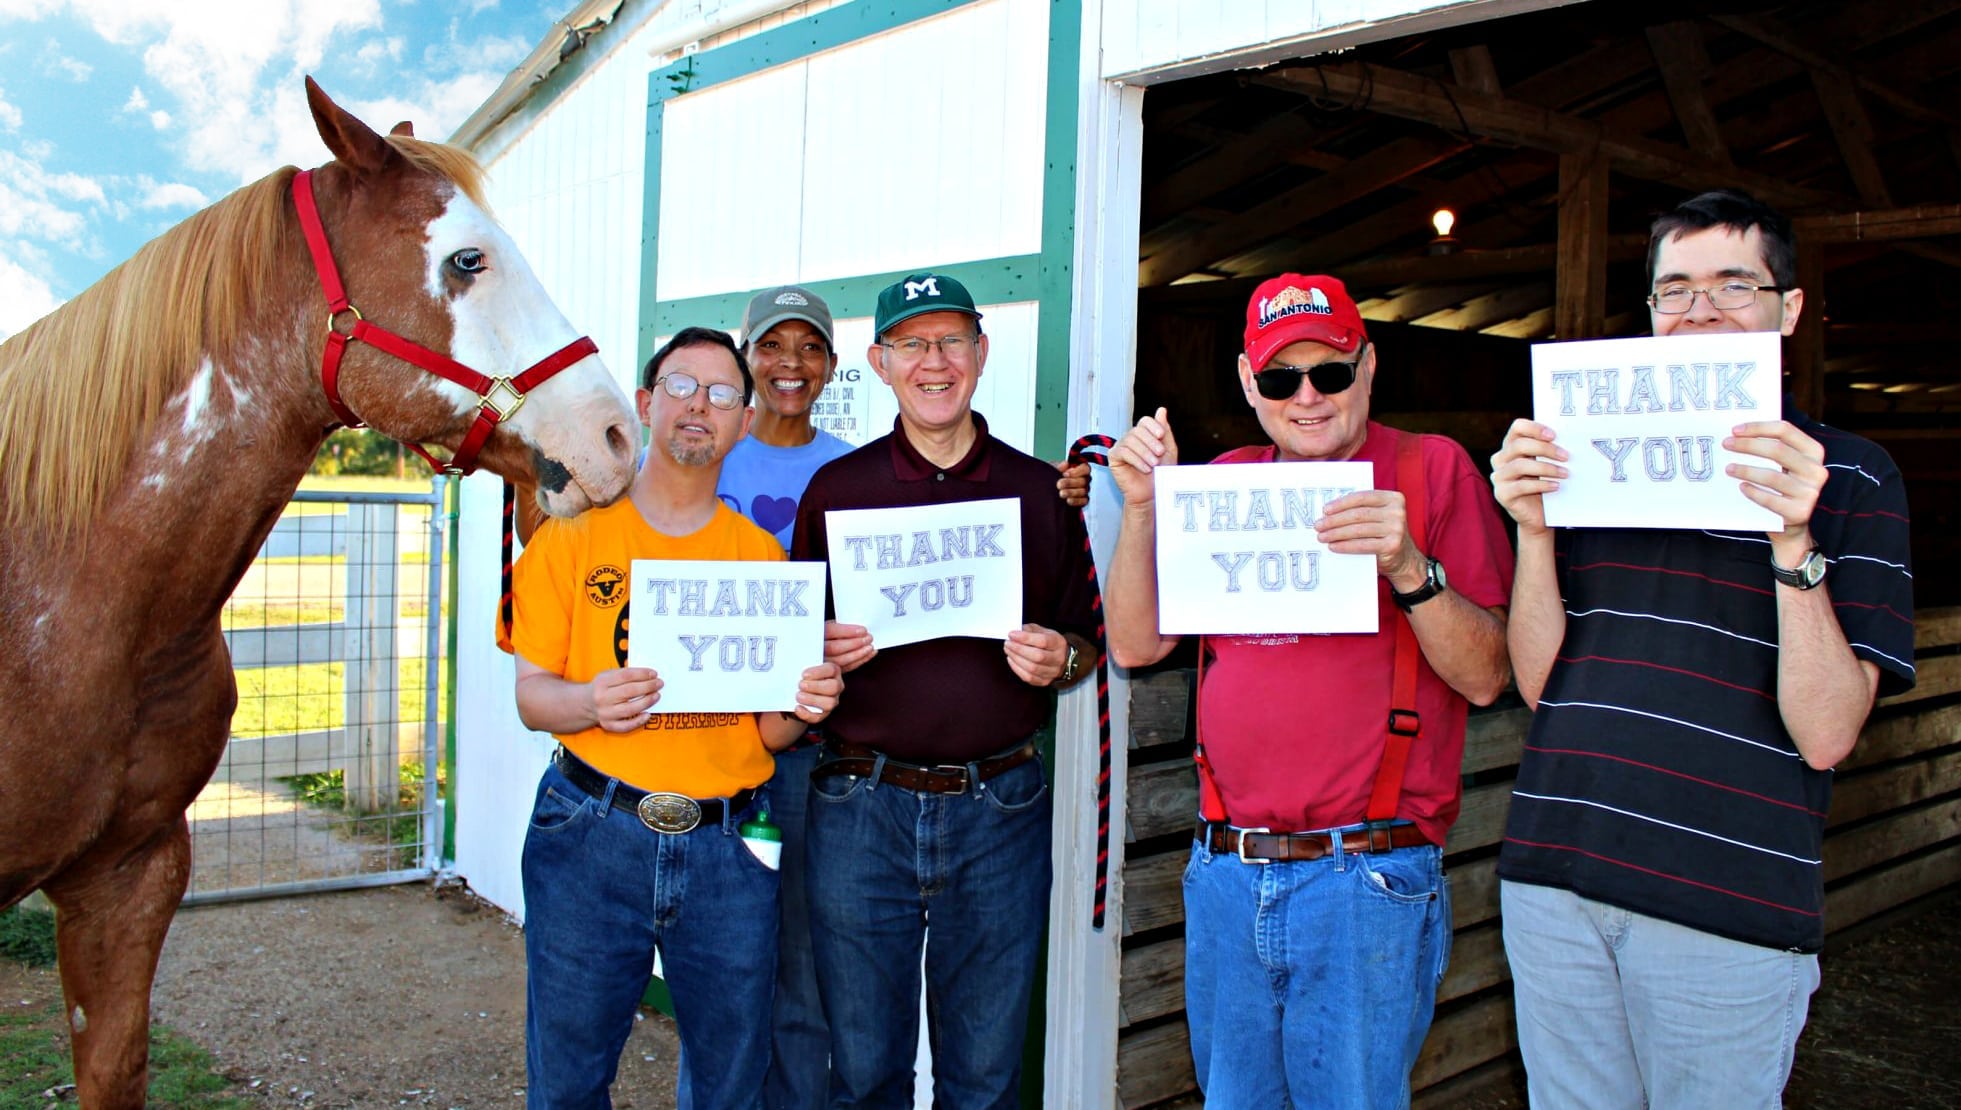 Four residents holding signs that say Thank You stand next to a volunteer and a horse outside of a stable.